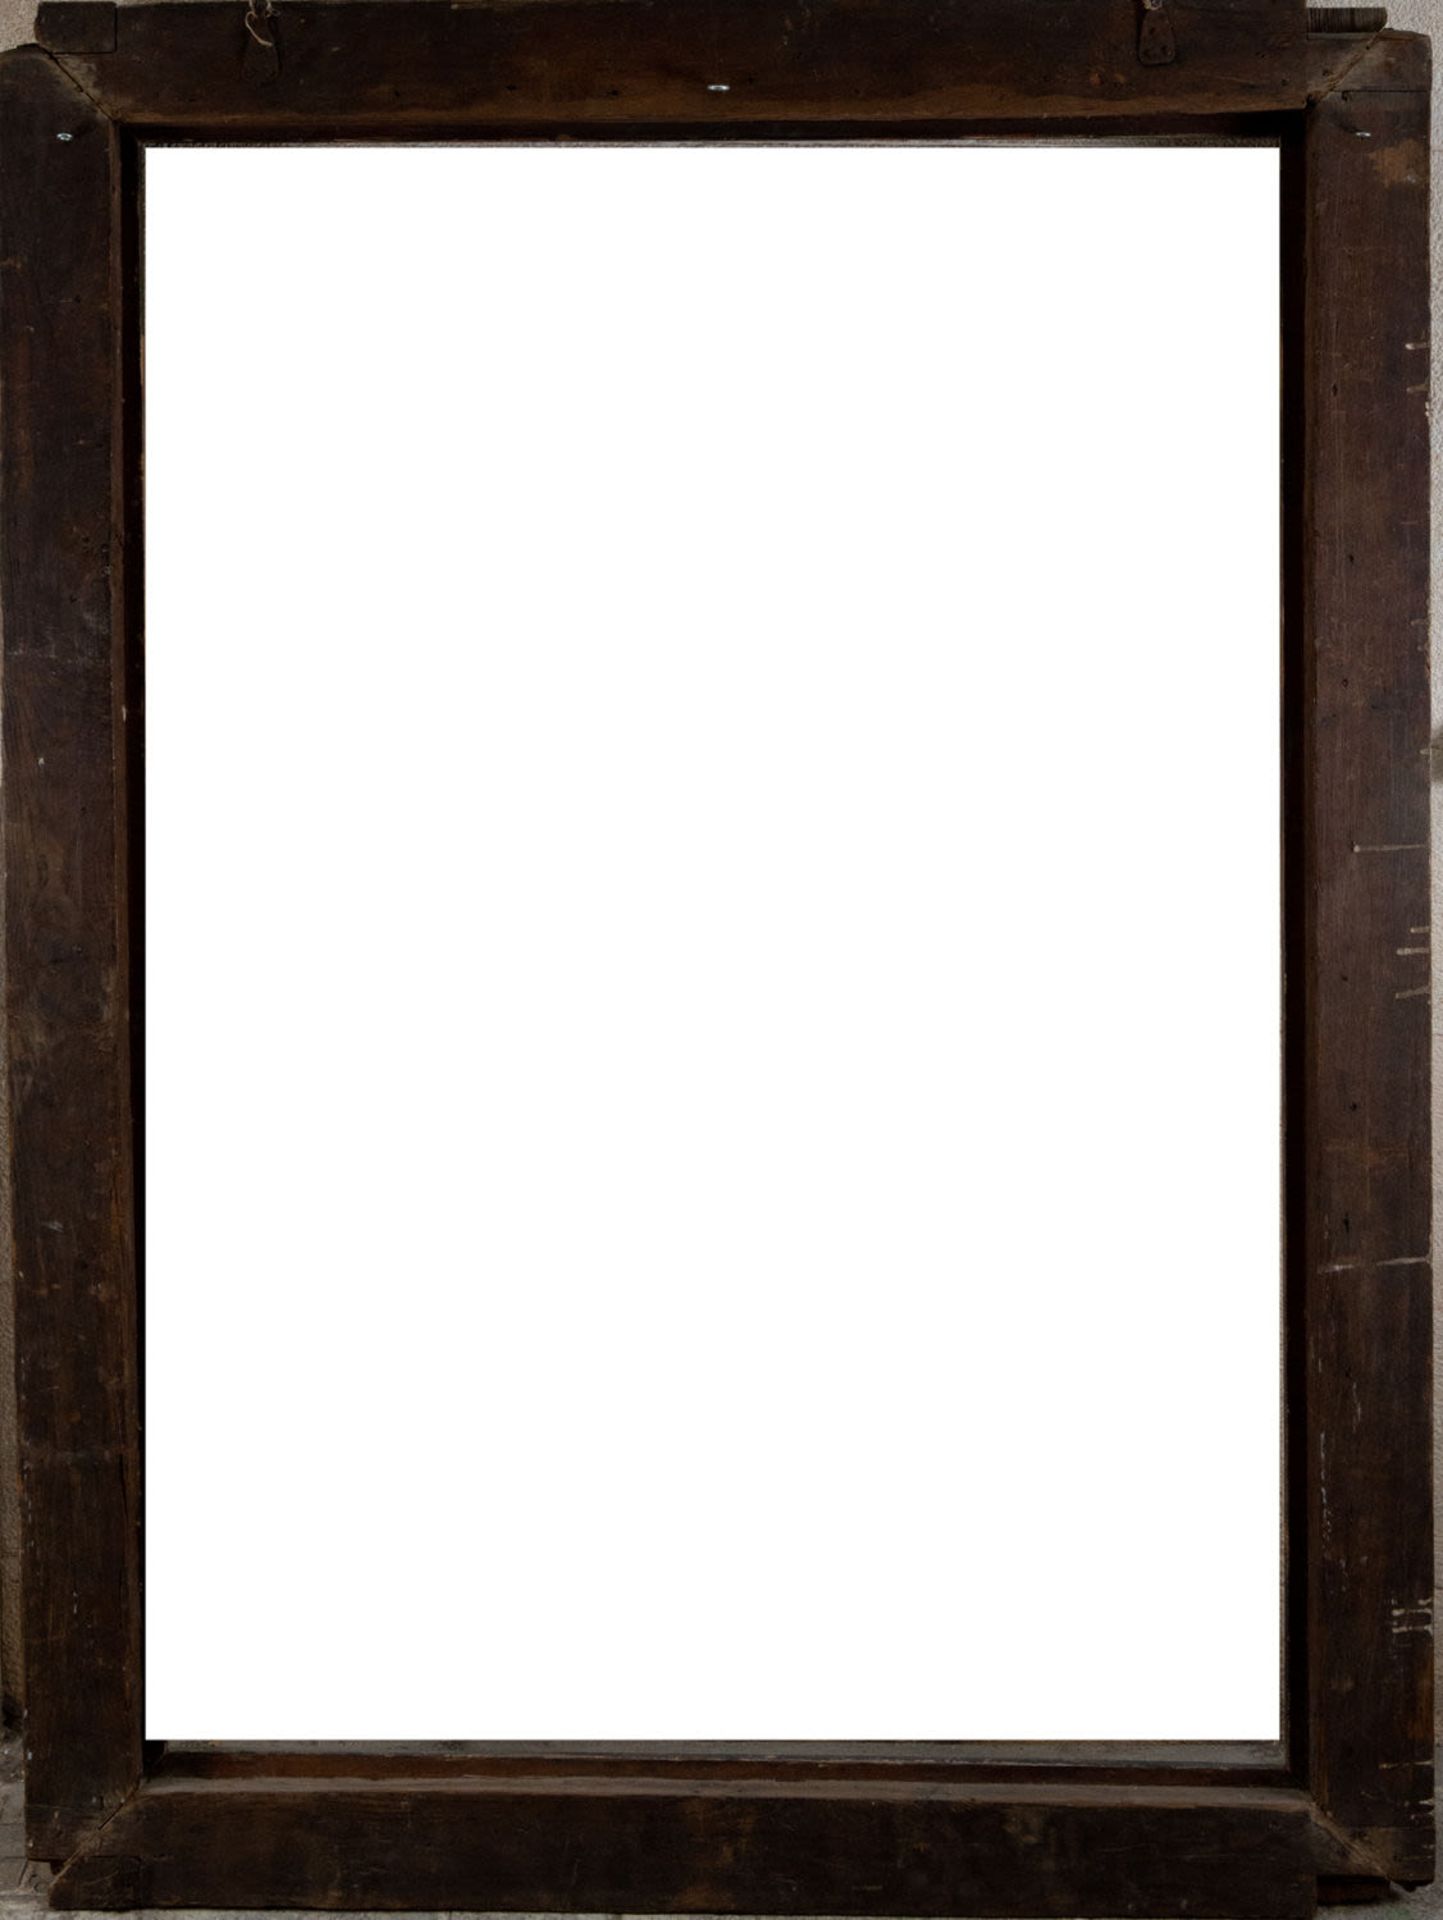 Large period frame in gilded, marbled and polychrome wood, Provenzal France, 17th century - Image 2 of 2